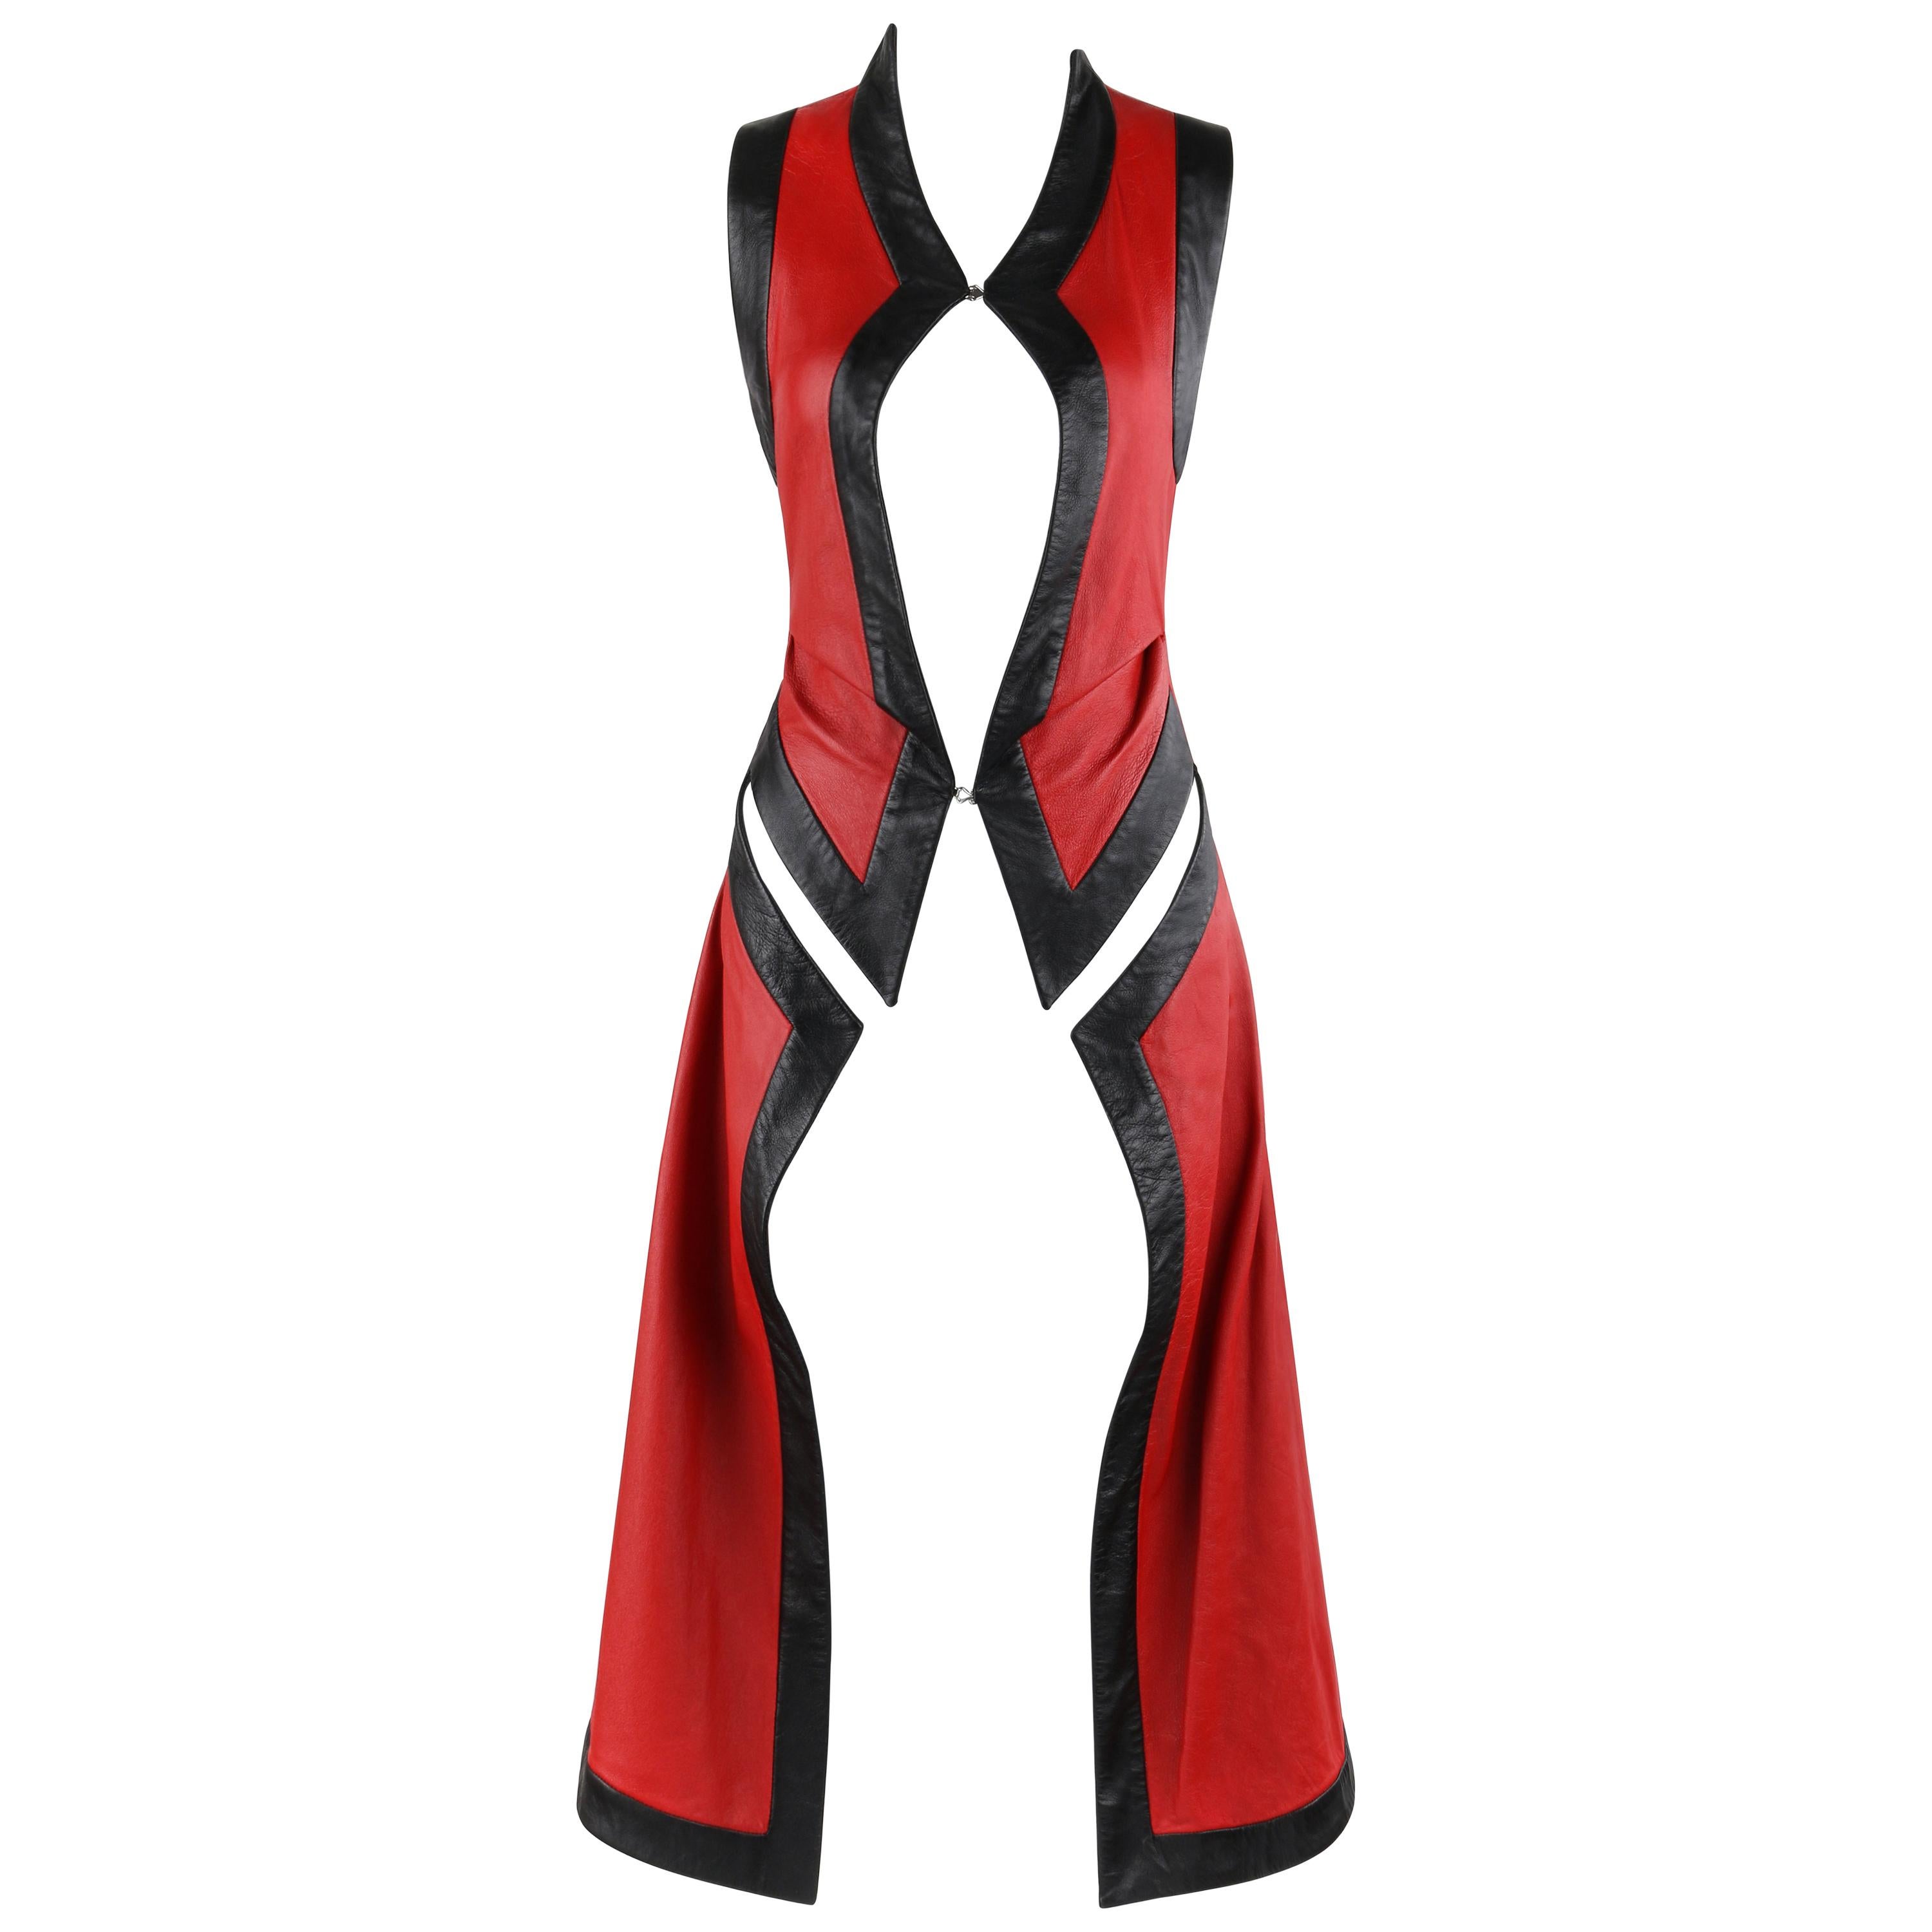 ALEXANDER McQUEEN S/S 2000 “Eye” Runway Red Black Leather Cut Out Vest Jacket For Sale